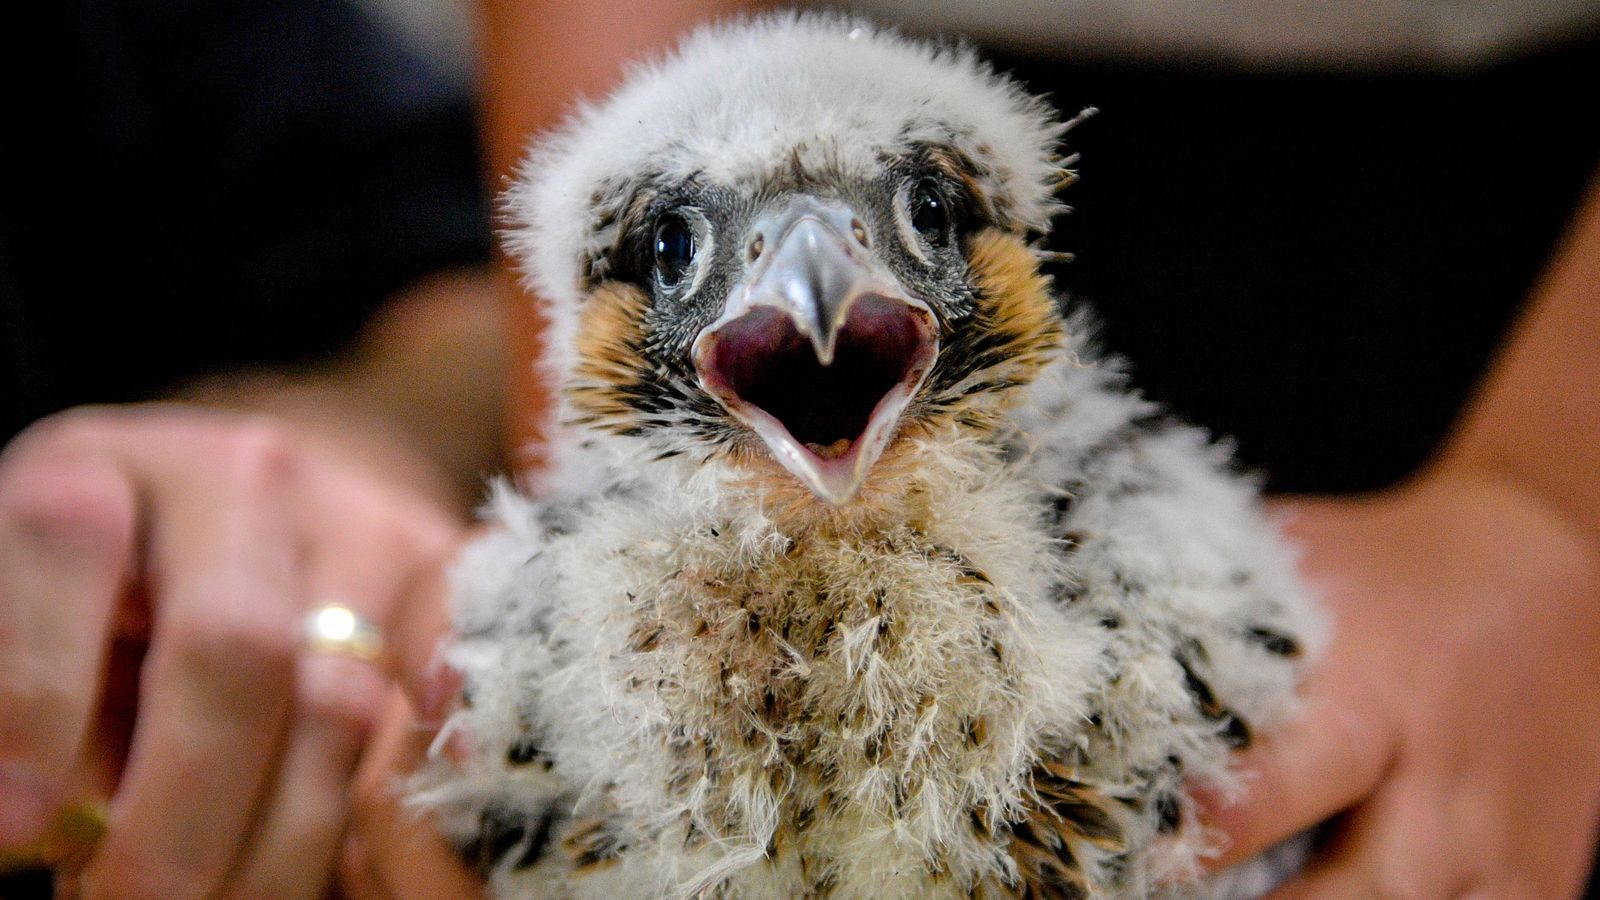 West Lothian breeder who illegally sold peregrine falcon chicks ordered to hand over more than £7,000